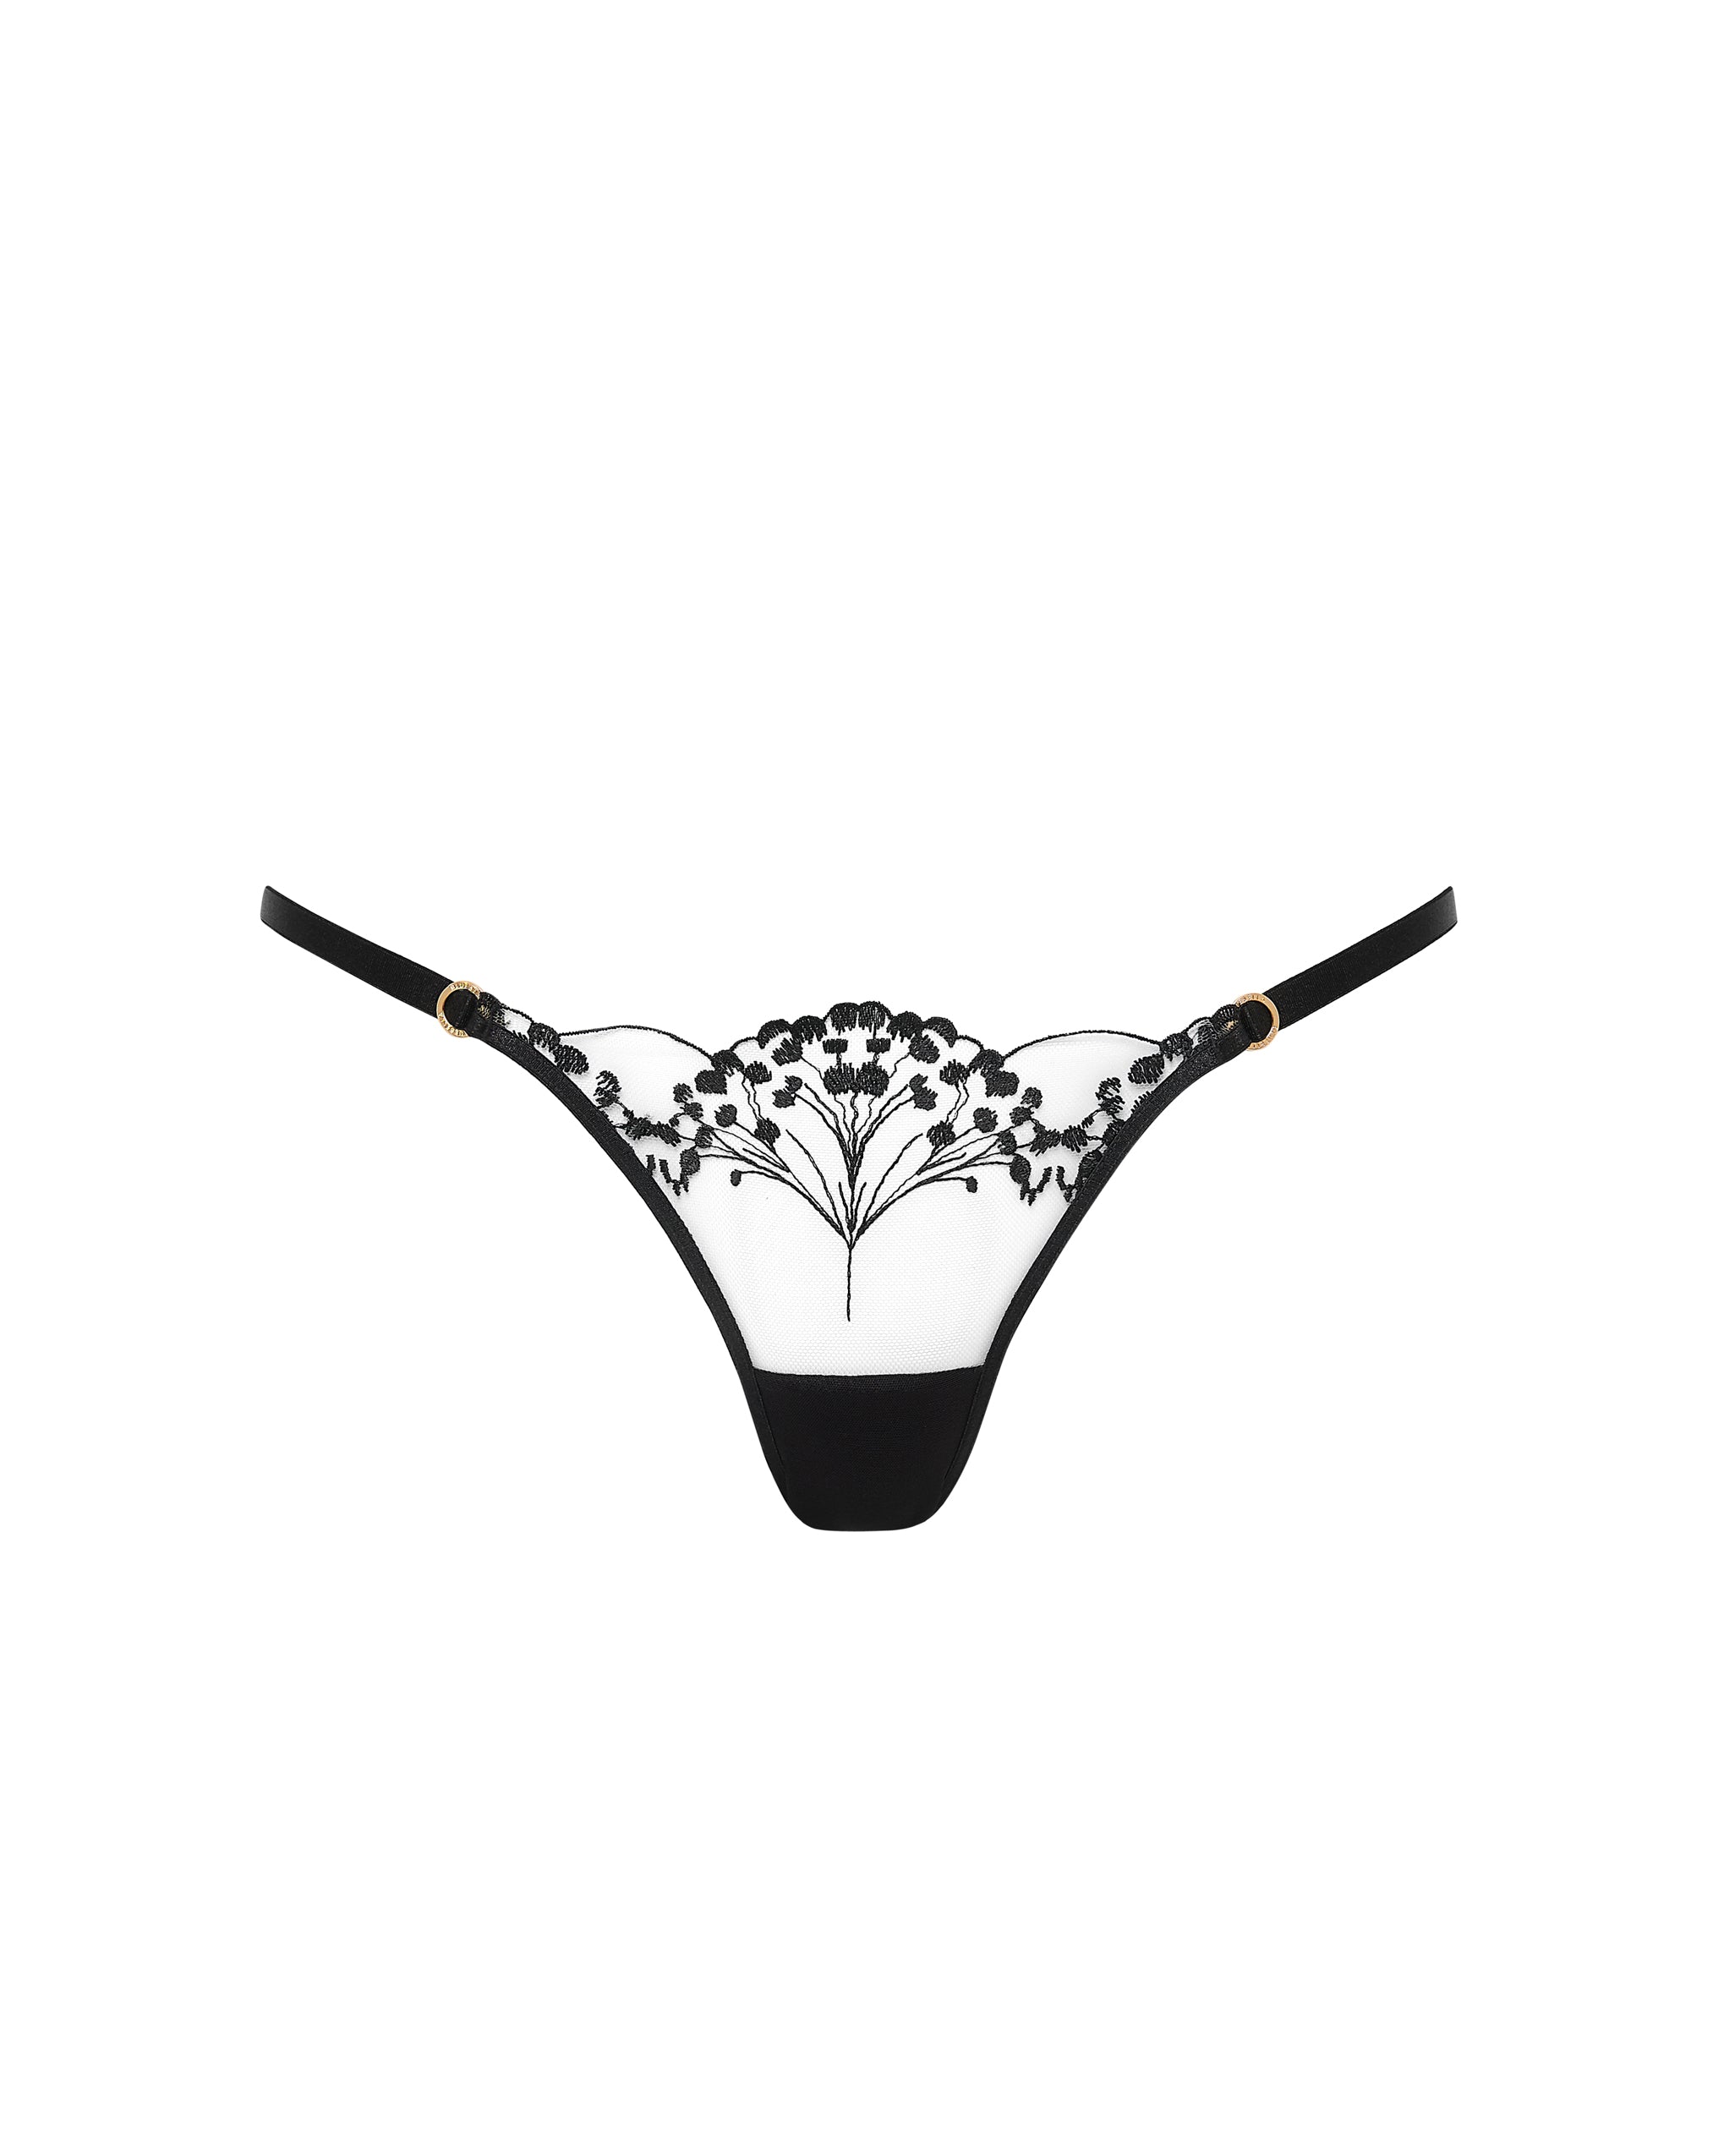 Urban Outfitters Bluebella Marisa Embroidered Thong